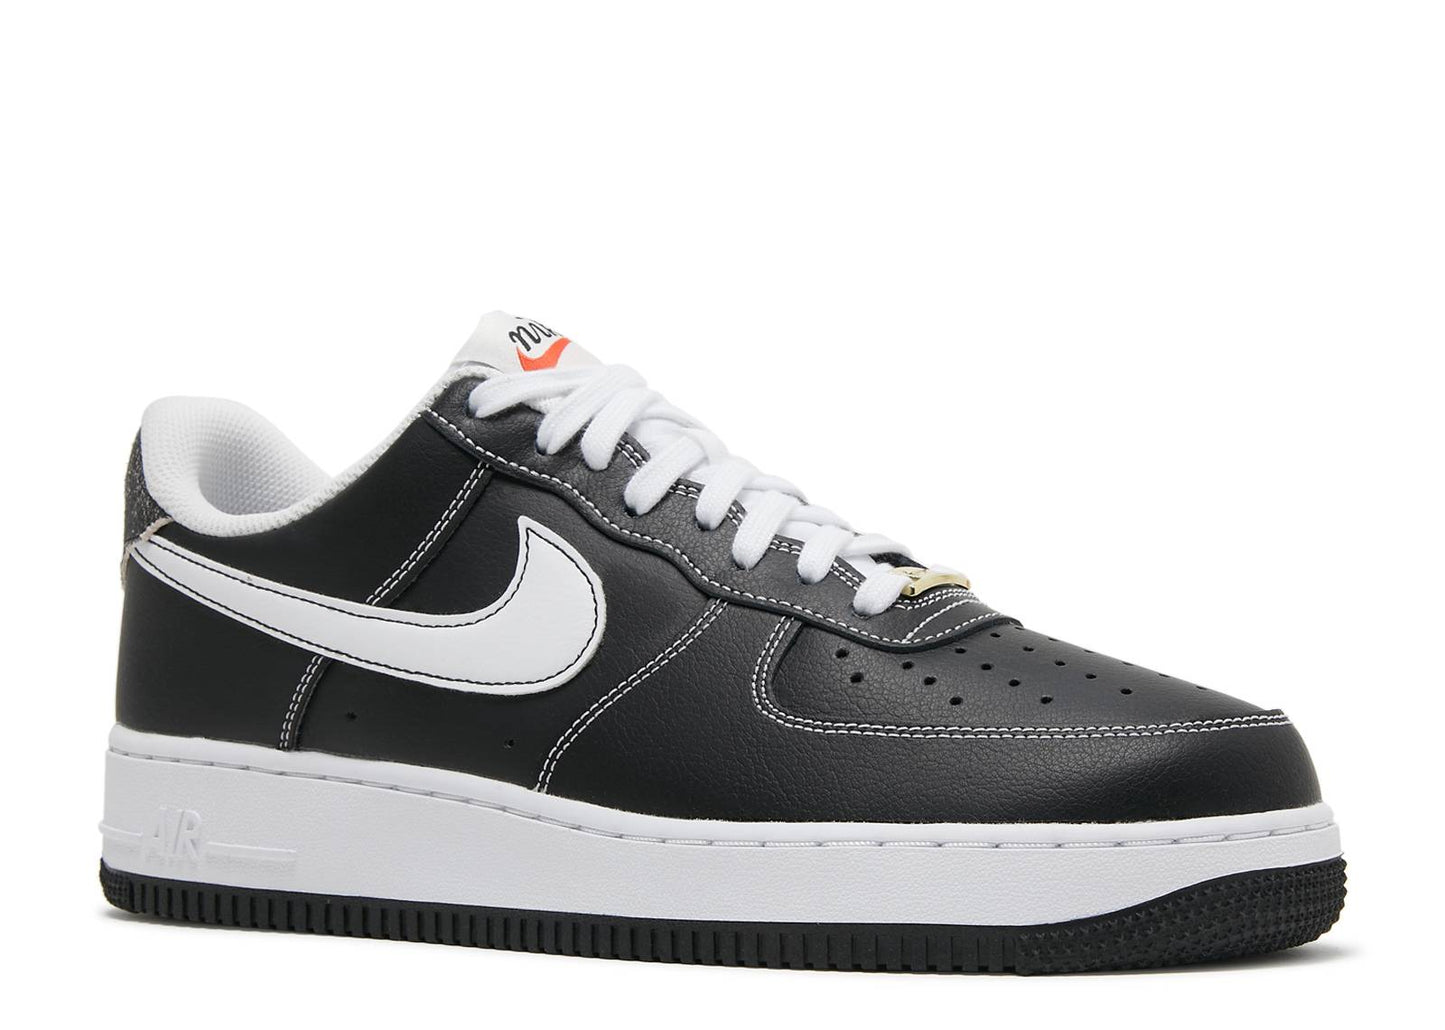 Nike Air Force 1 Low First Use "Black/White"